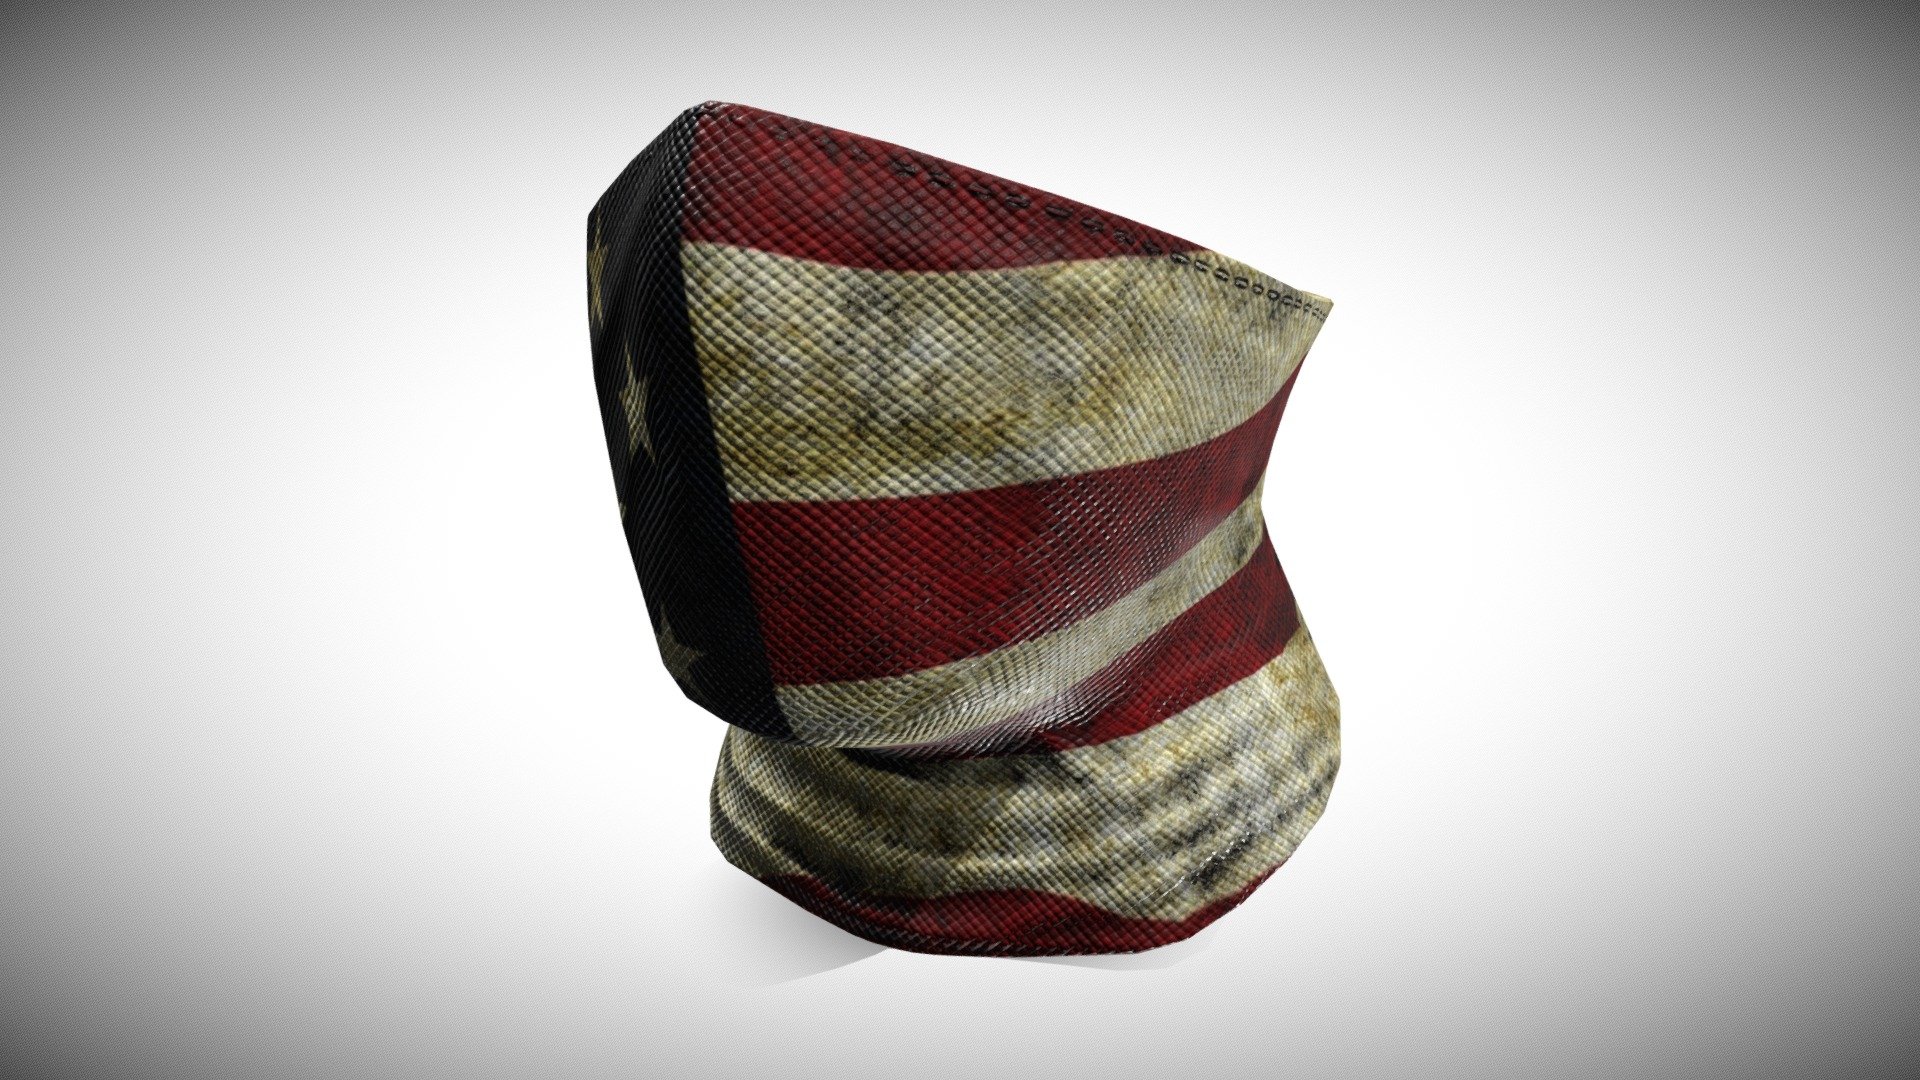 Half face mask, Balaclava with USA flag. Game ready.

Lowpoly 3D Model. High quality Textures 2048x2048 3d model